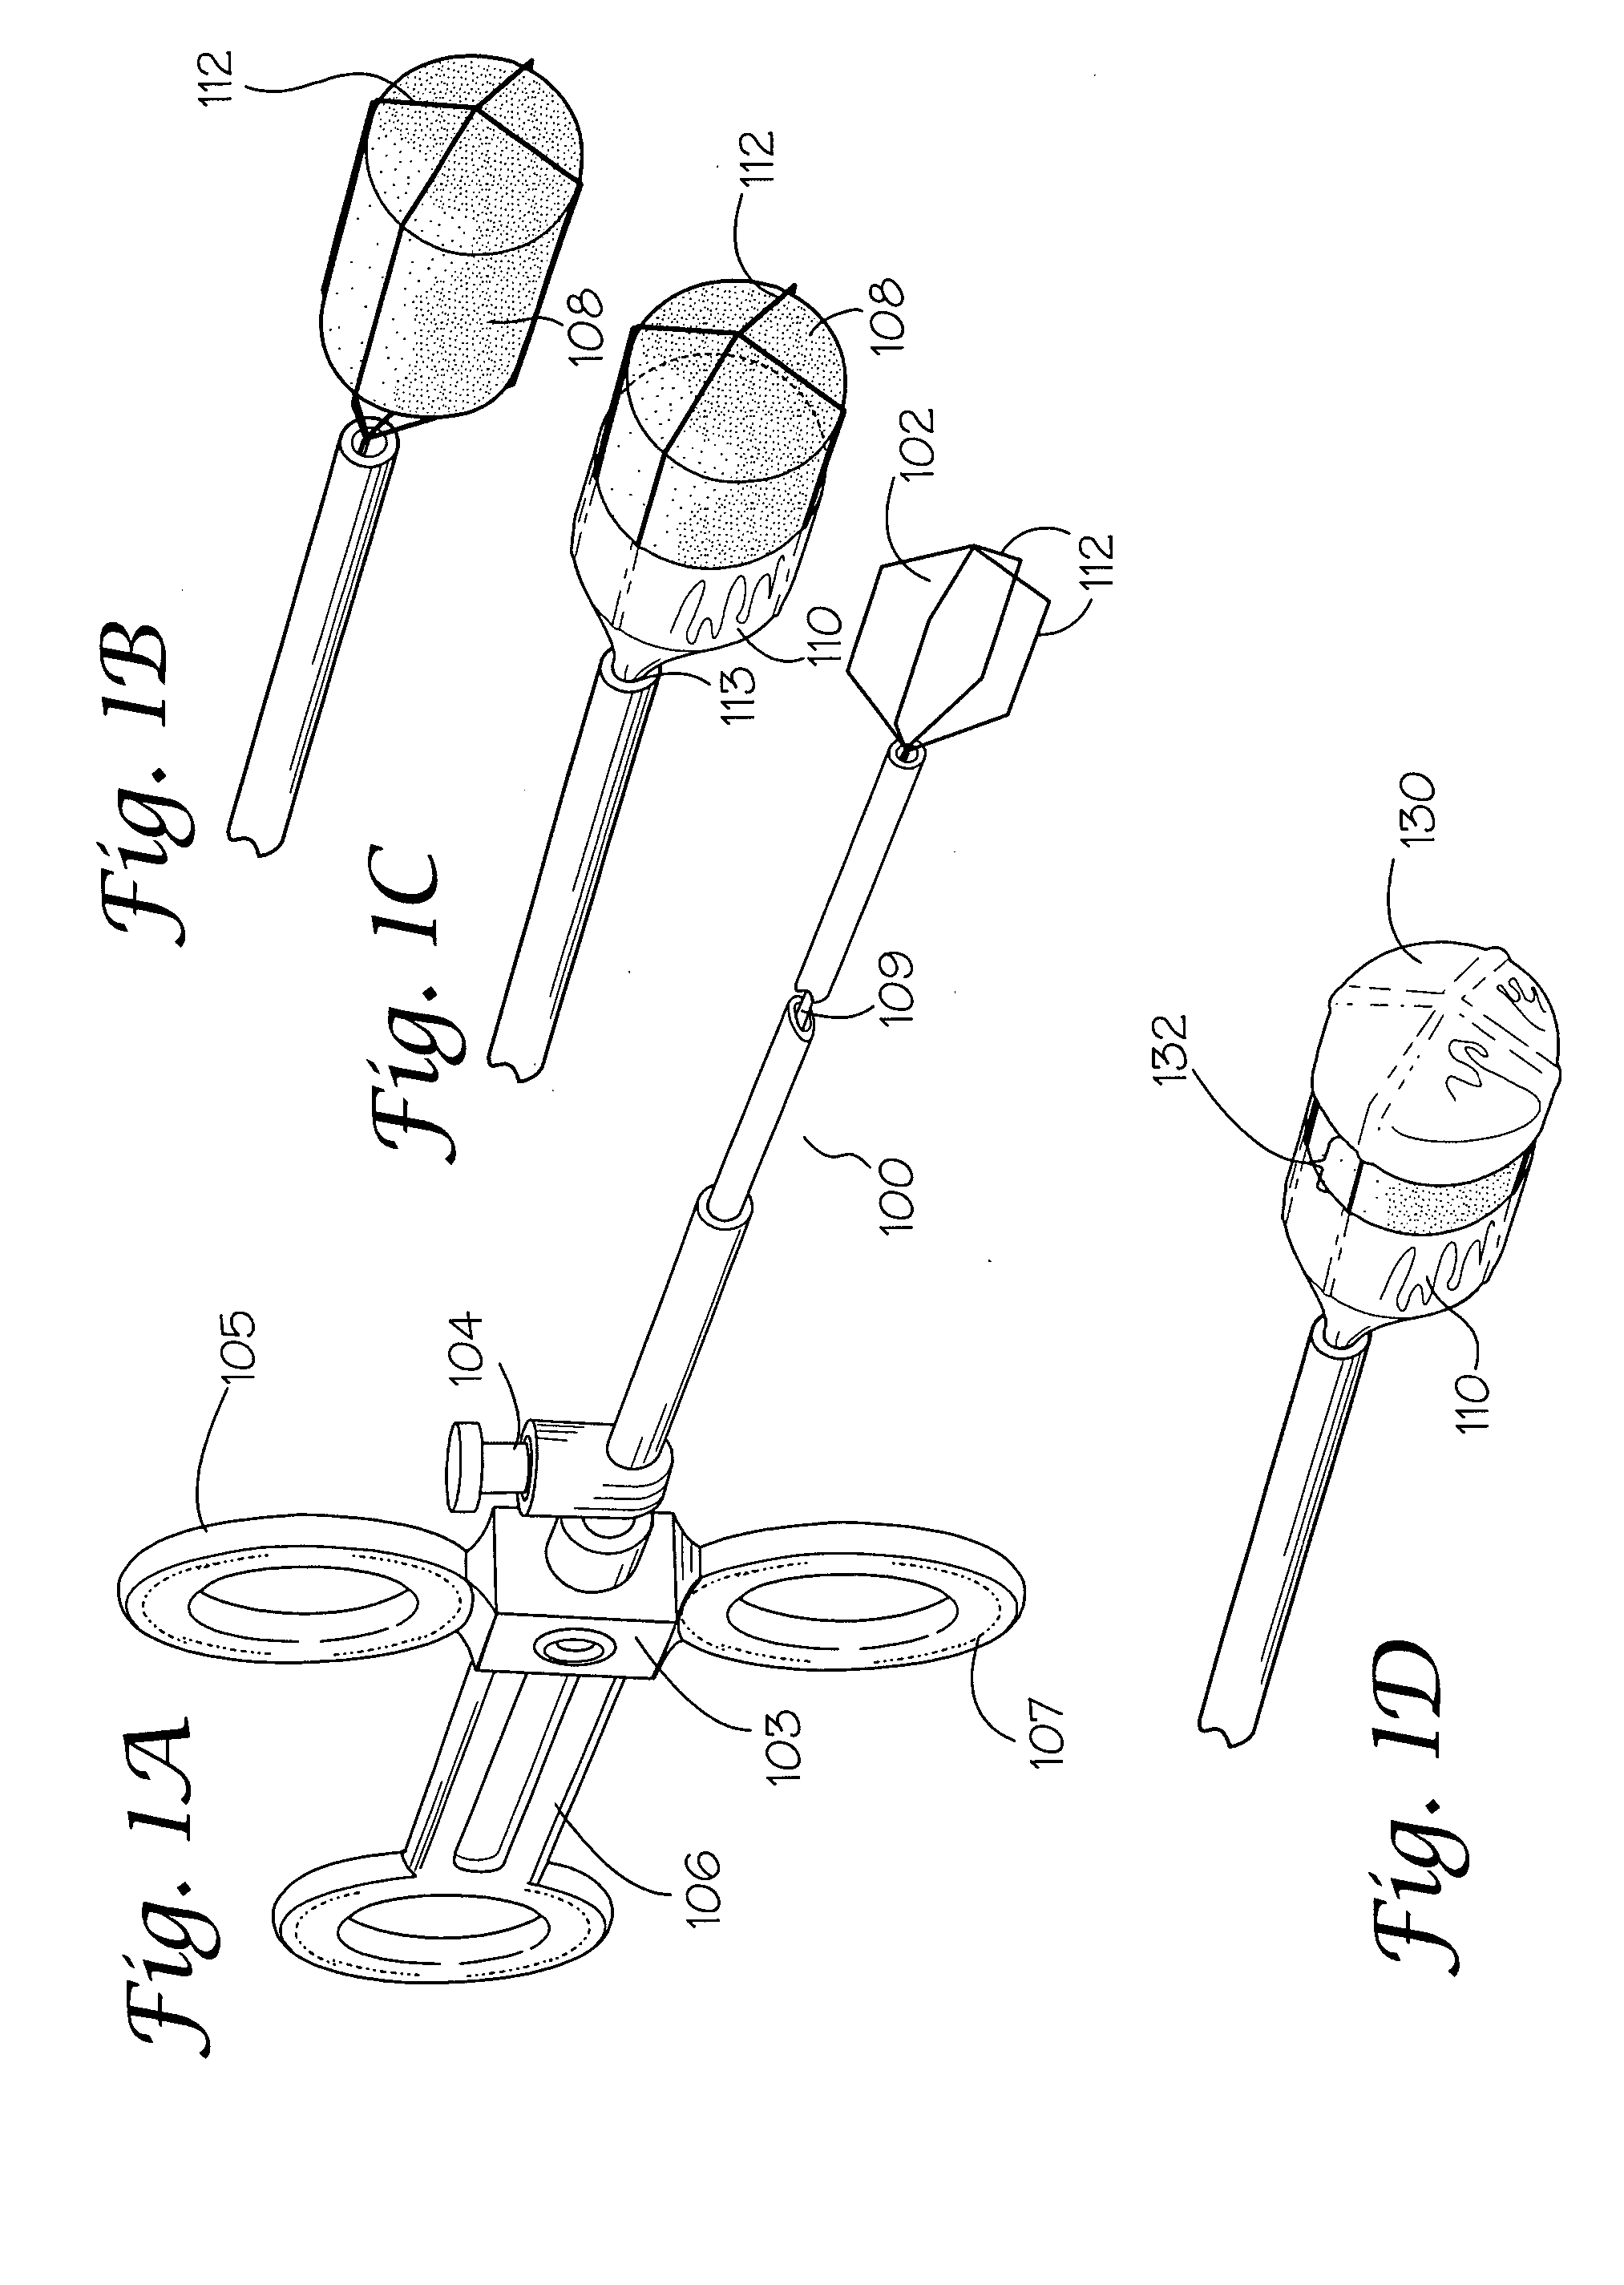 Medical liquid delivery device